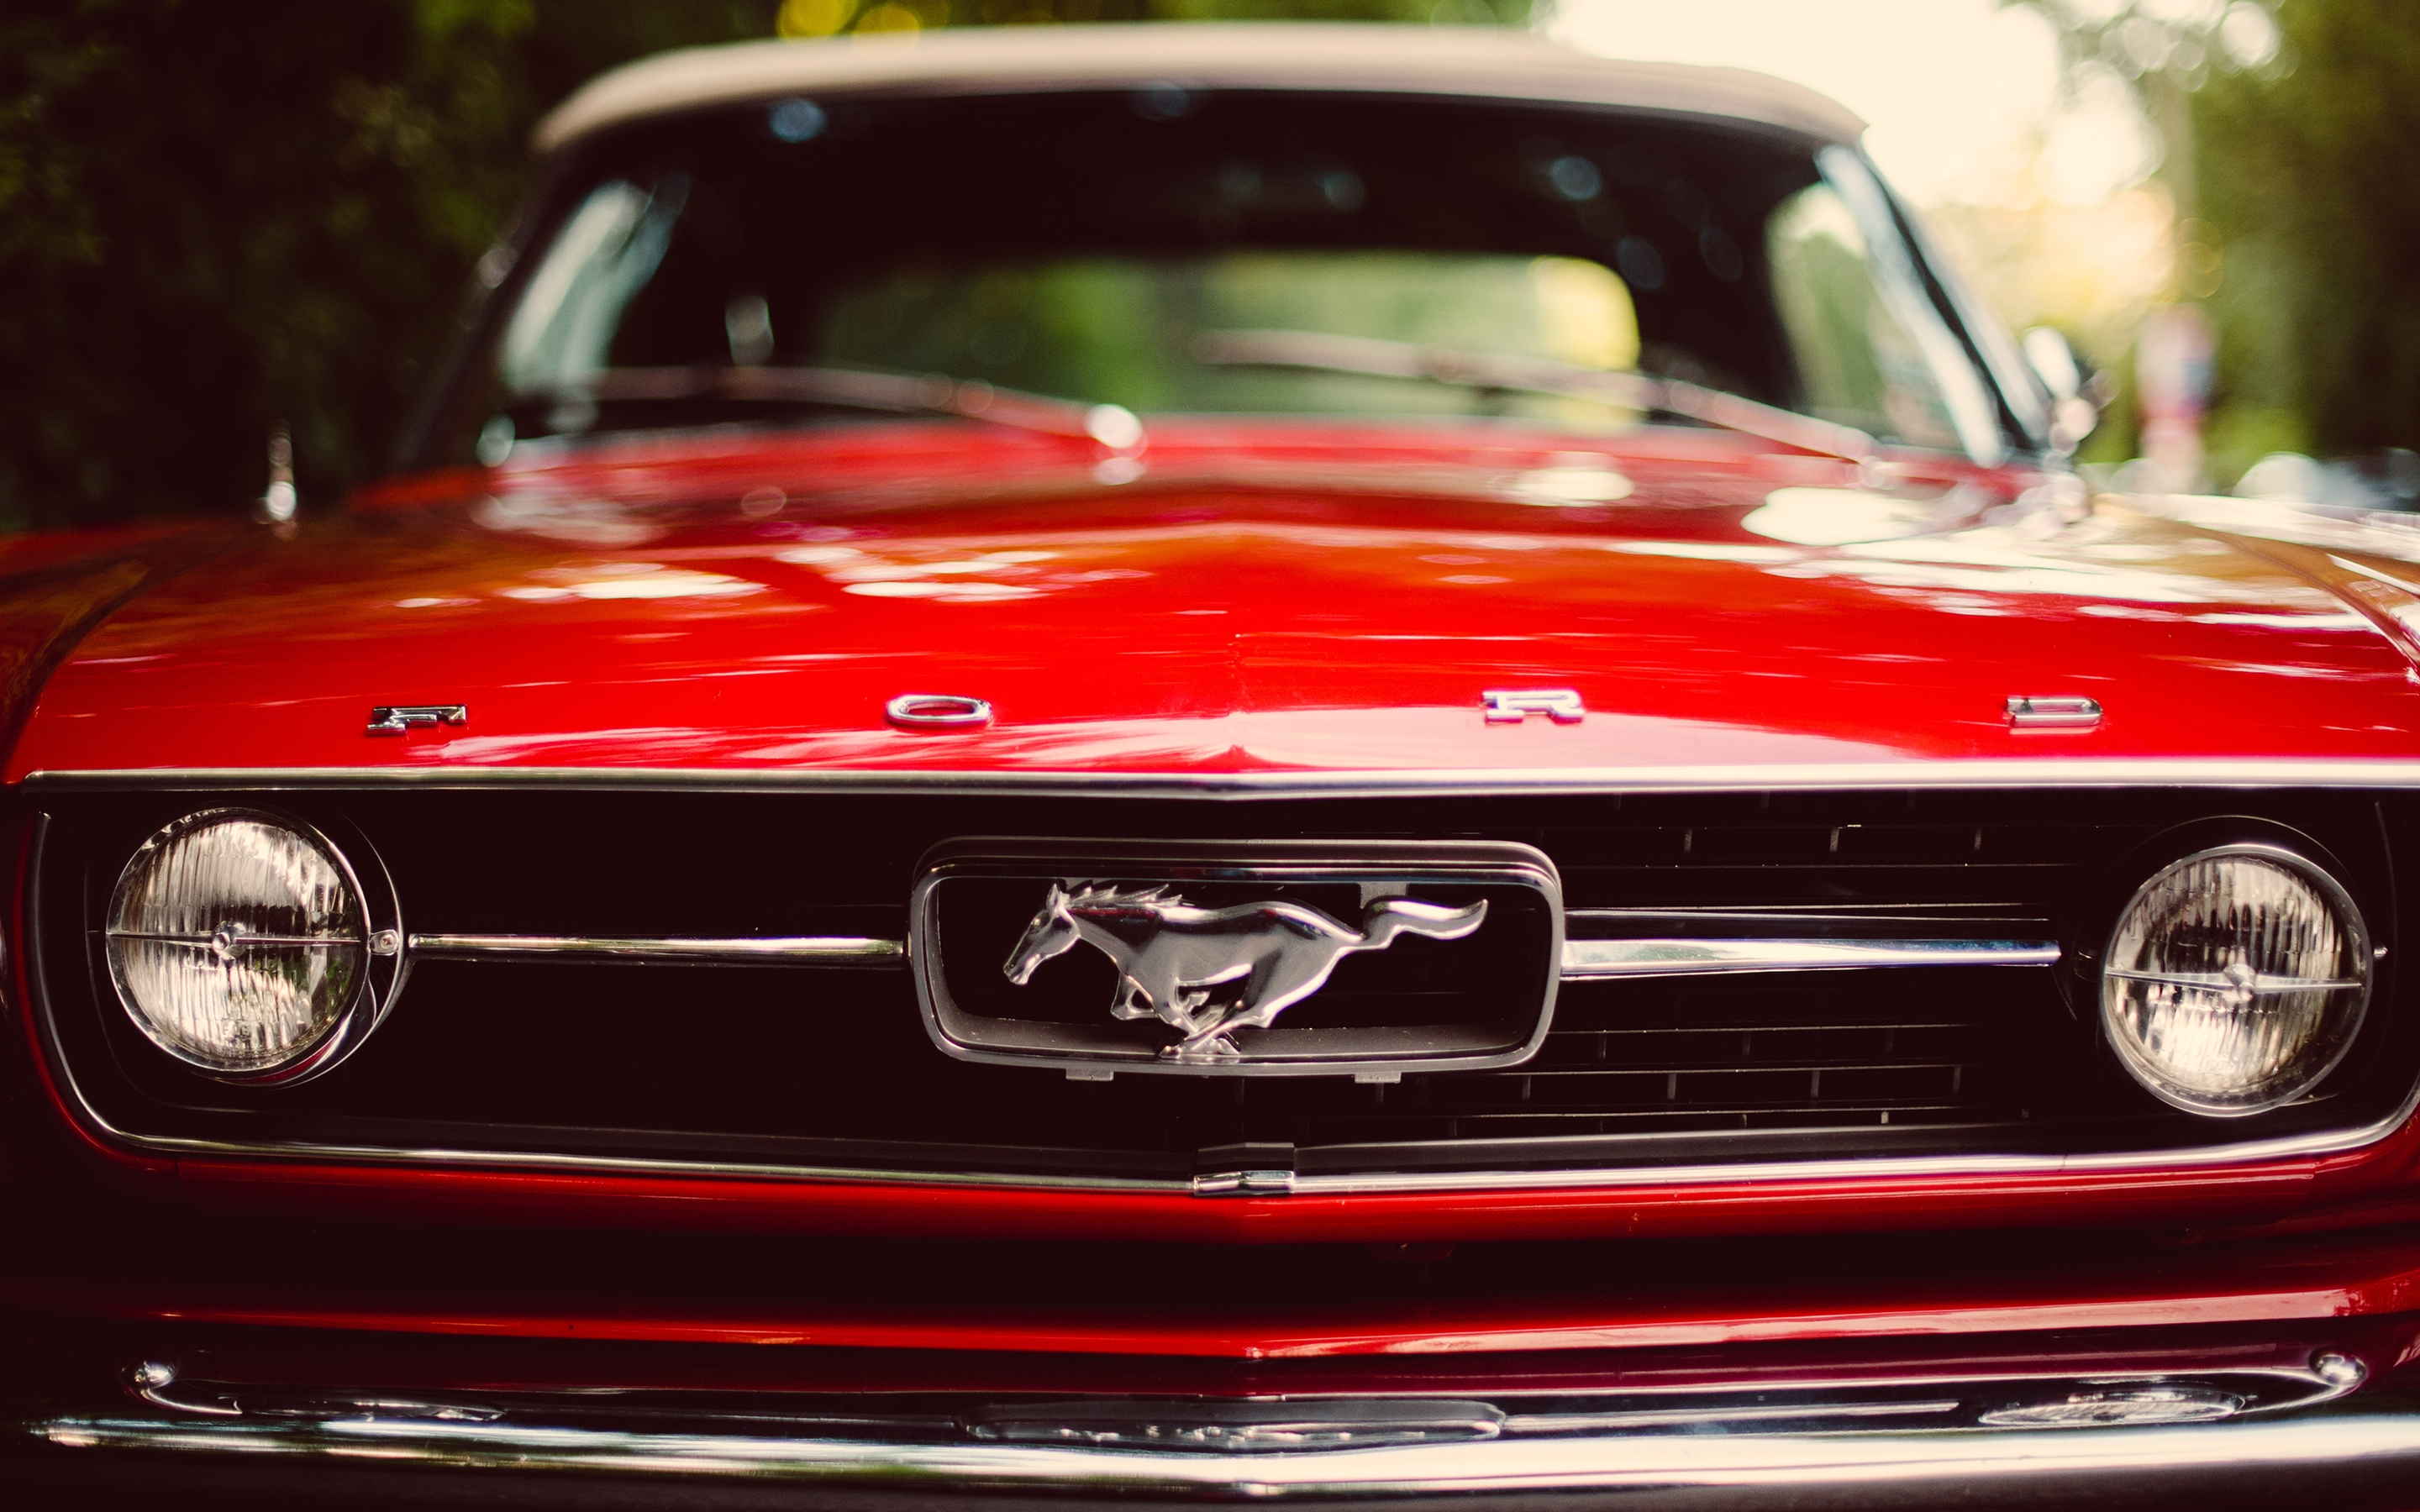 Red Ford Mustang  for 2880 x 1800 Retina Display resolution